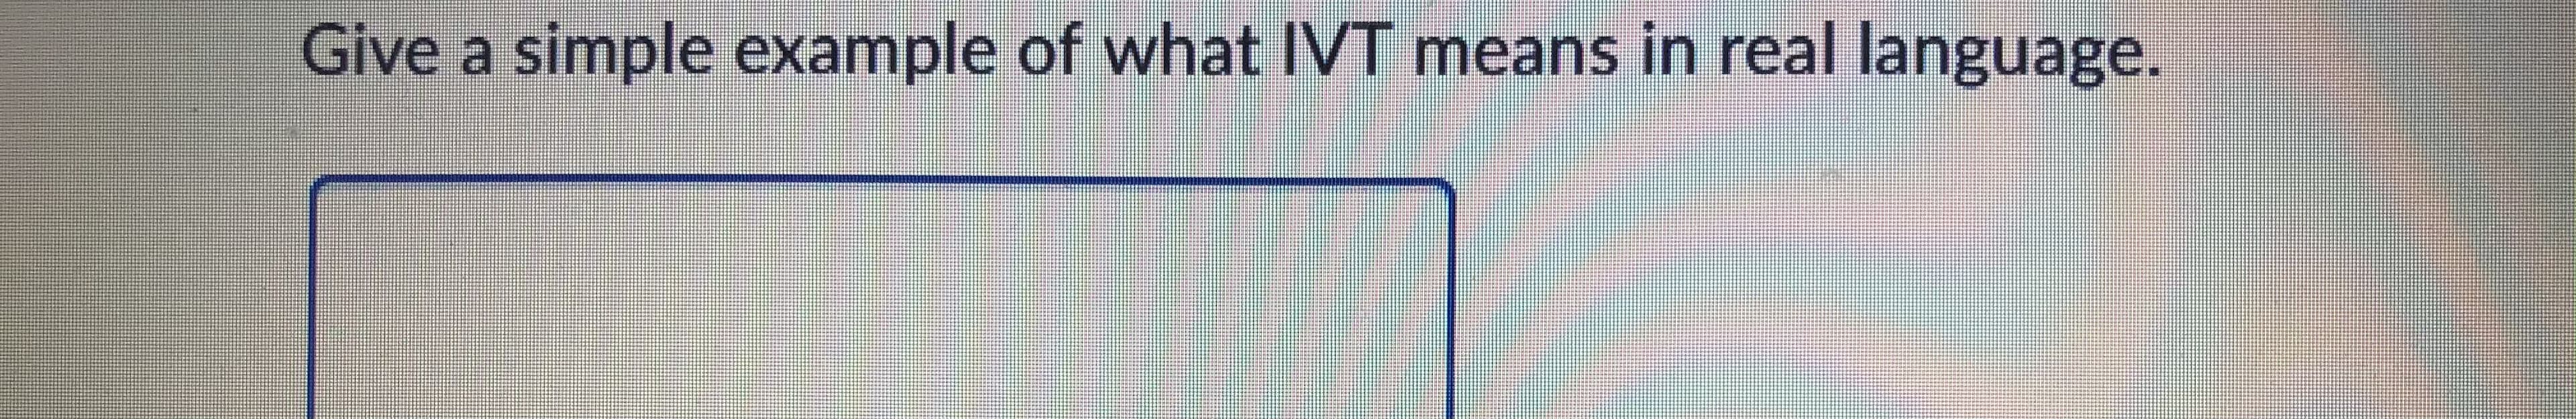 Give a simple example of what IVT means in real language.
